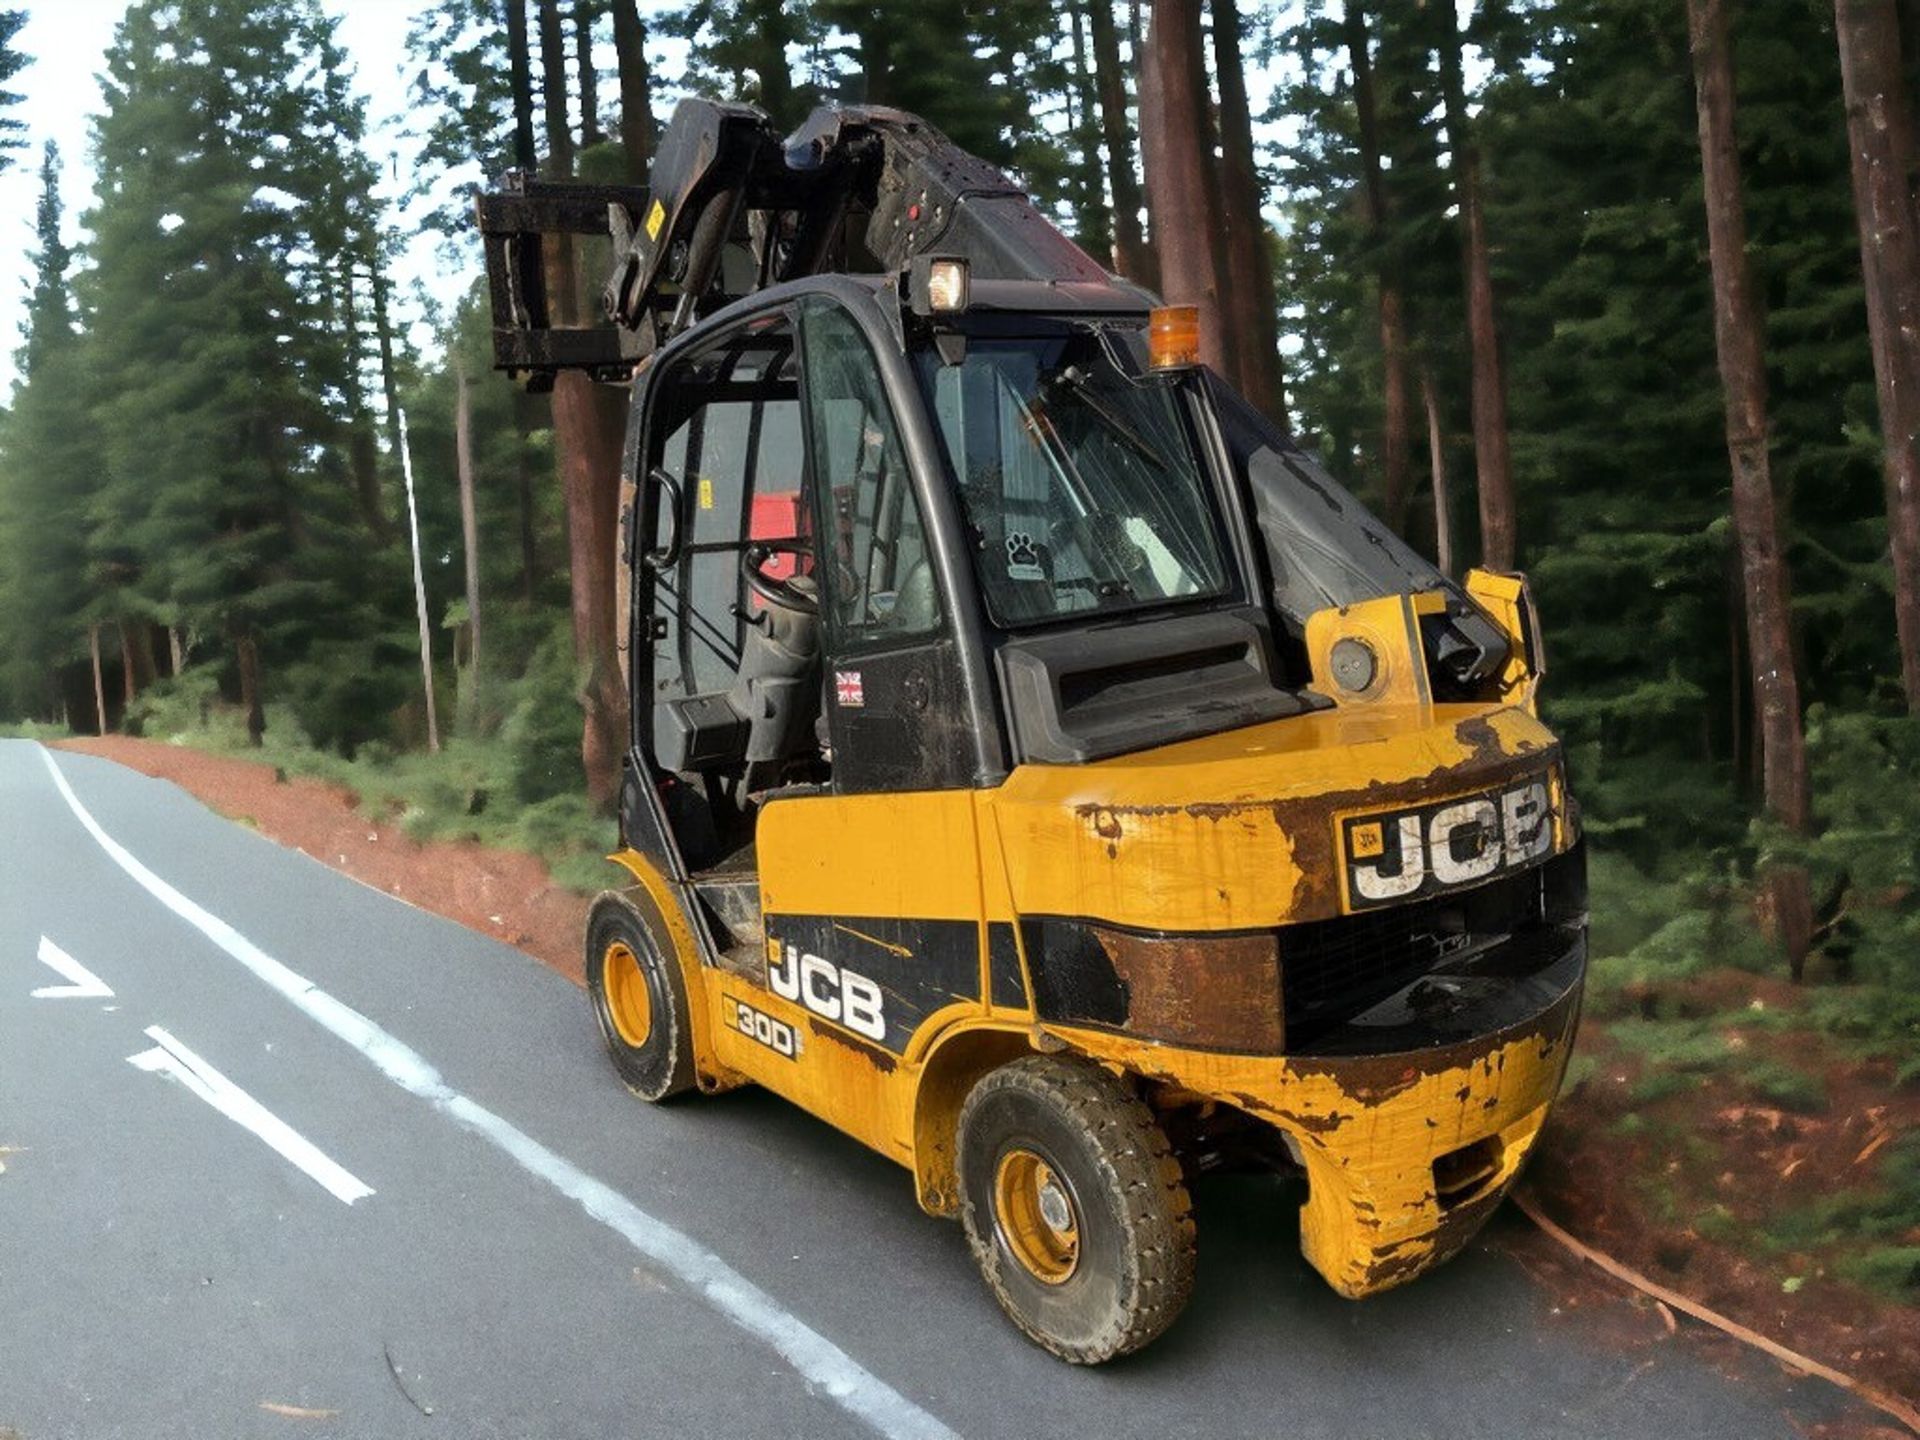 2014 JCB TELETRUK TLT30D TELEHANDLER - RELIABLE, EFFICIENT, AND READY TO WORK - Image 9 of 9